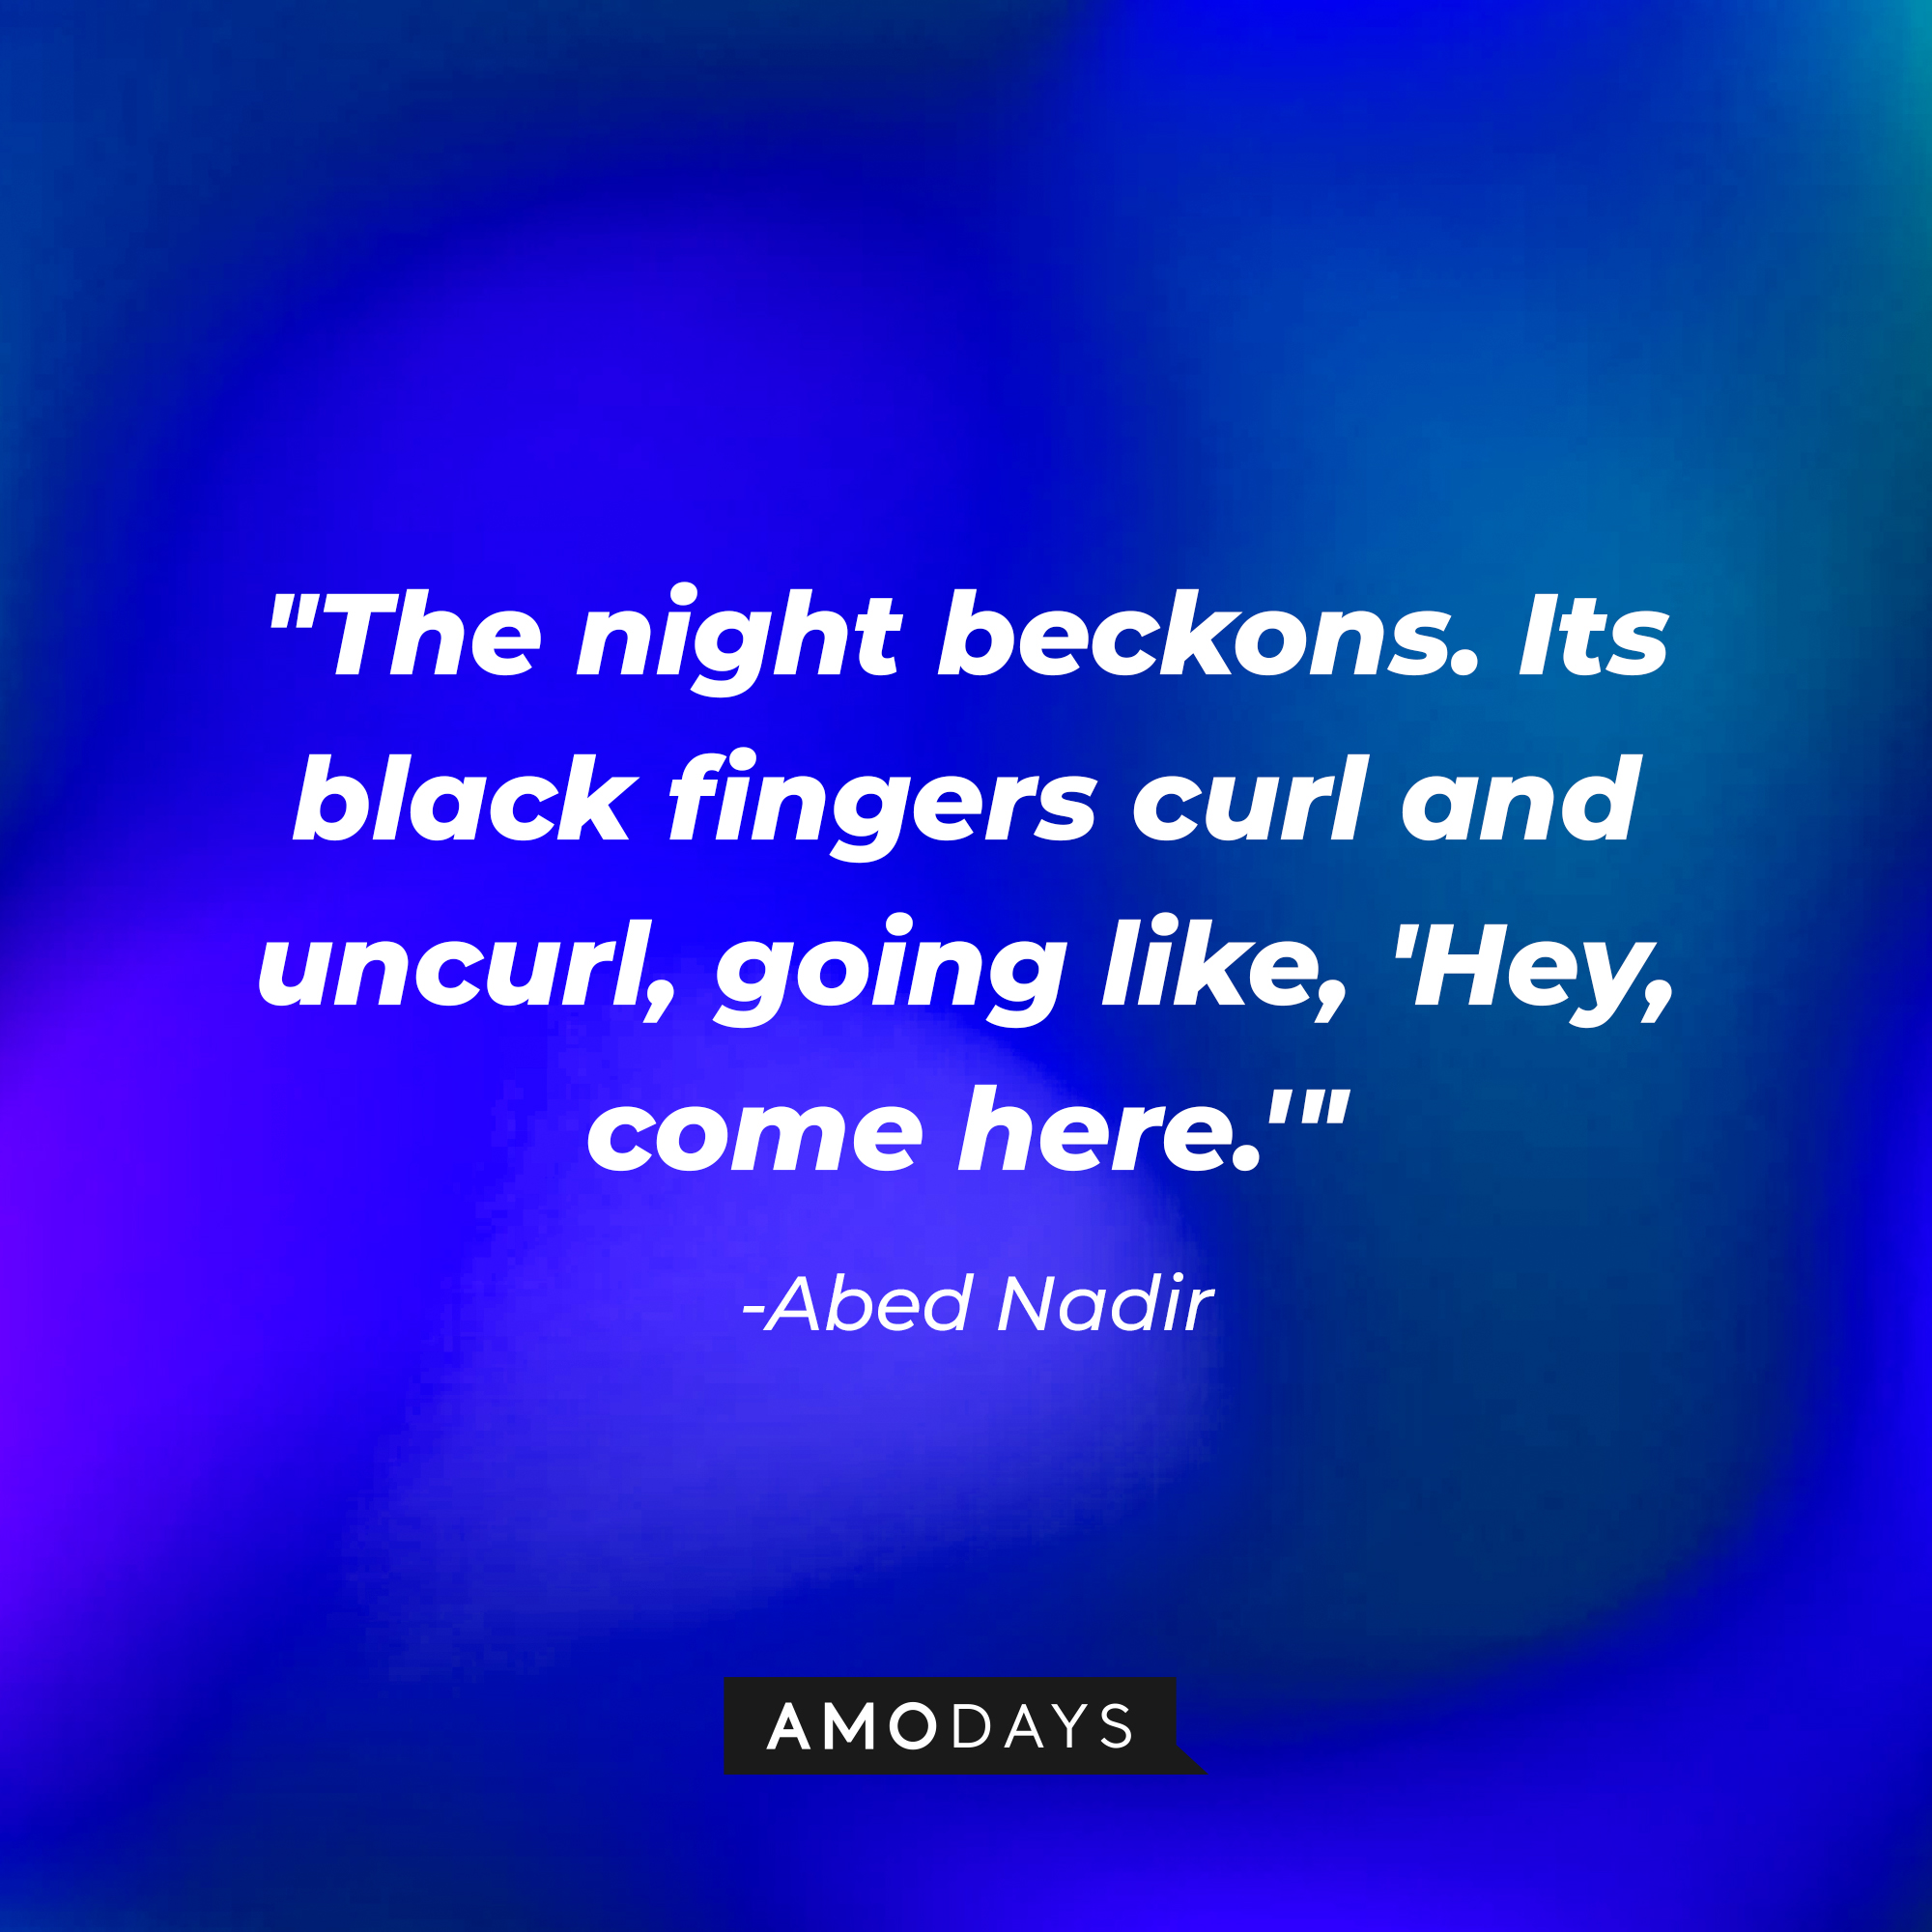 Abed Nadir’s quote:  "The night beckons. Its black fingers curl and uncurl, going like, 'Hey, come here.'" | Source: AmoDays